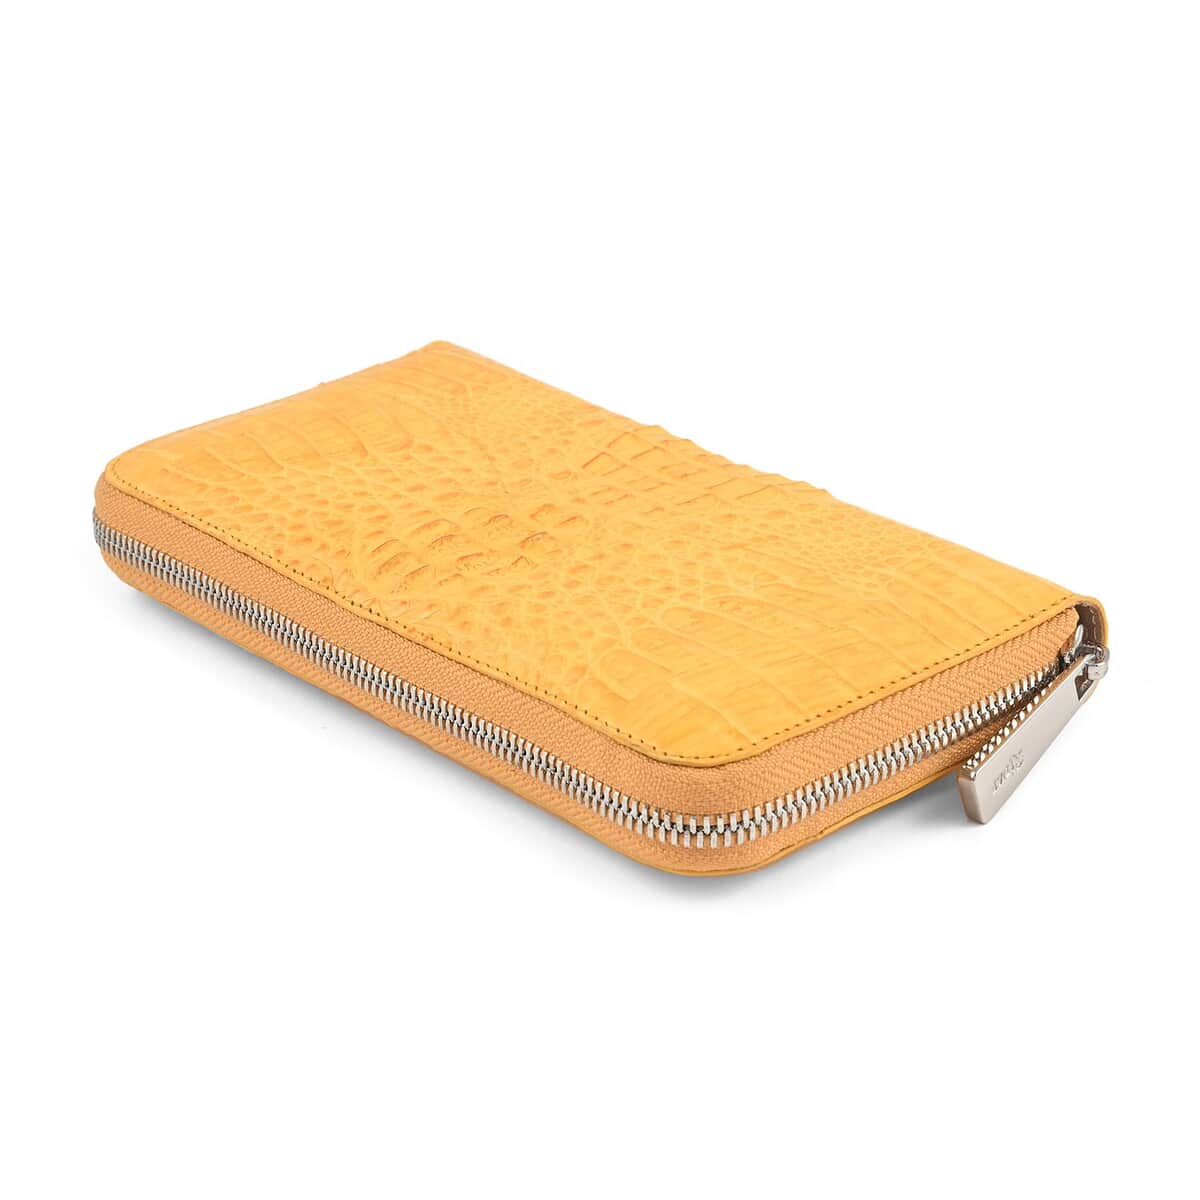 Closeout Brand River Yellow Genuine Crocodile Leather Clutch Bag , Clutches for Women , Leather Handbag , Clutch Purse image number 3